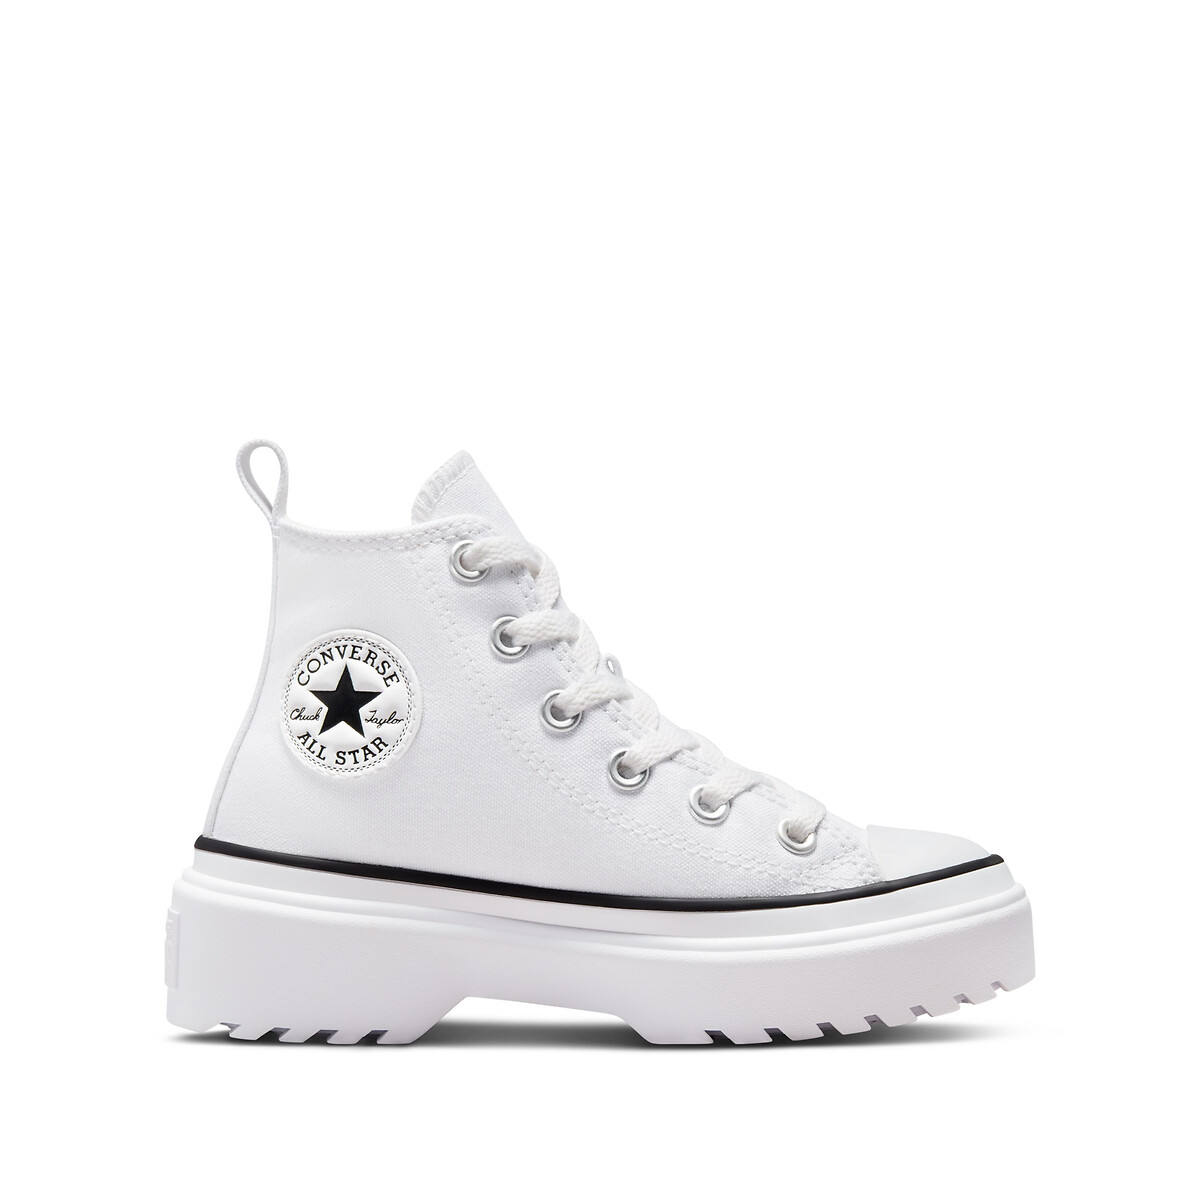 Kids Lugged Lift Hi Foundational Canvas High Top Trainers